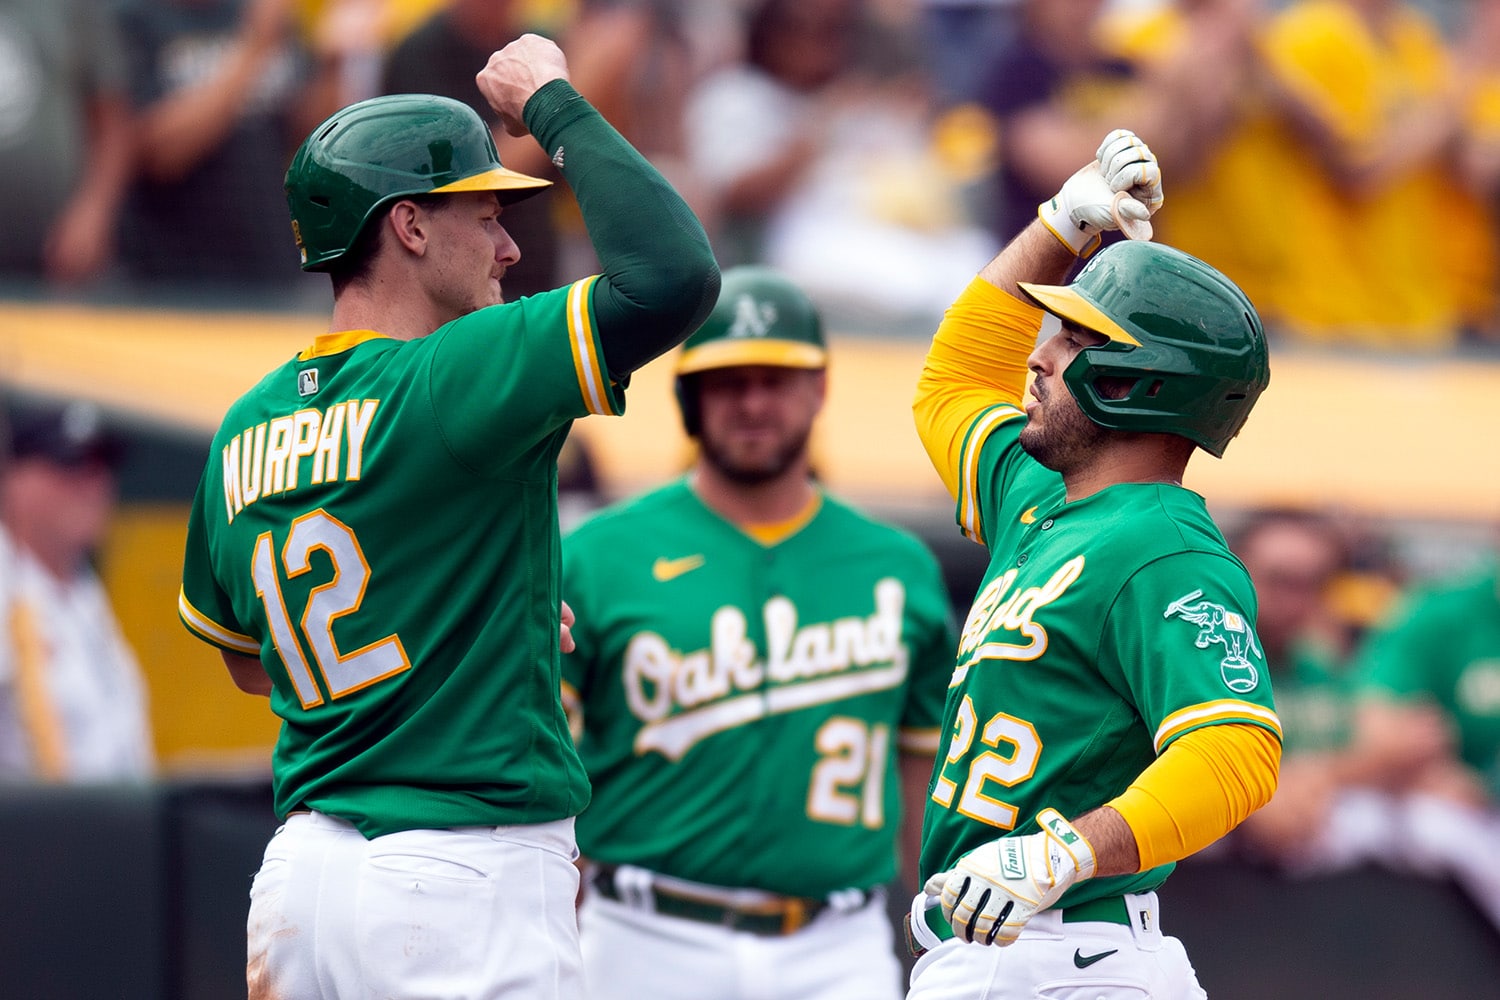 Oakland A's players Aledmys Diaz and Ramon Laureano celebrate after scoring a run